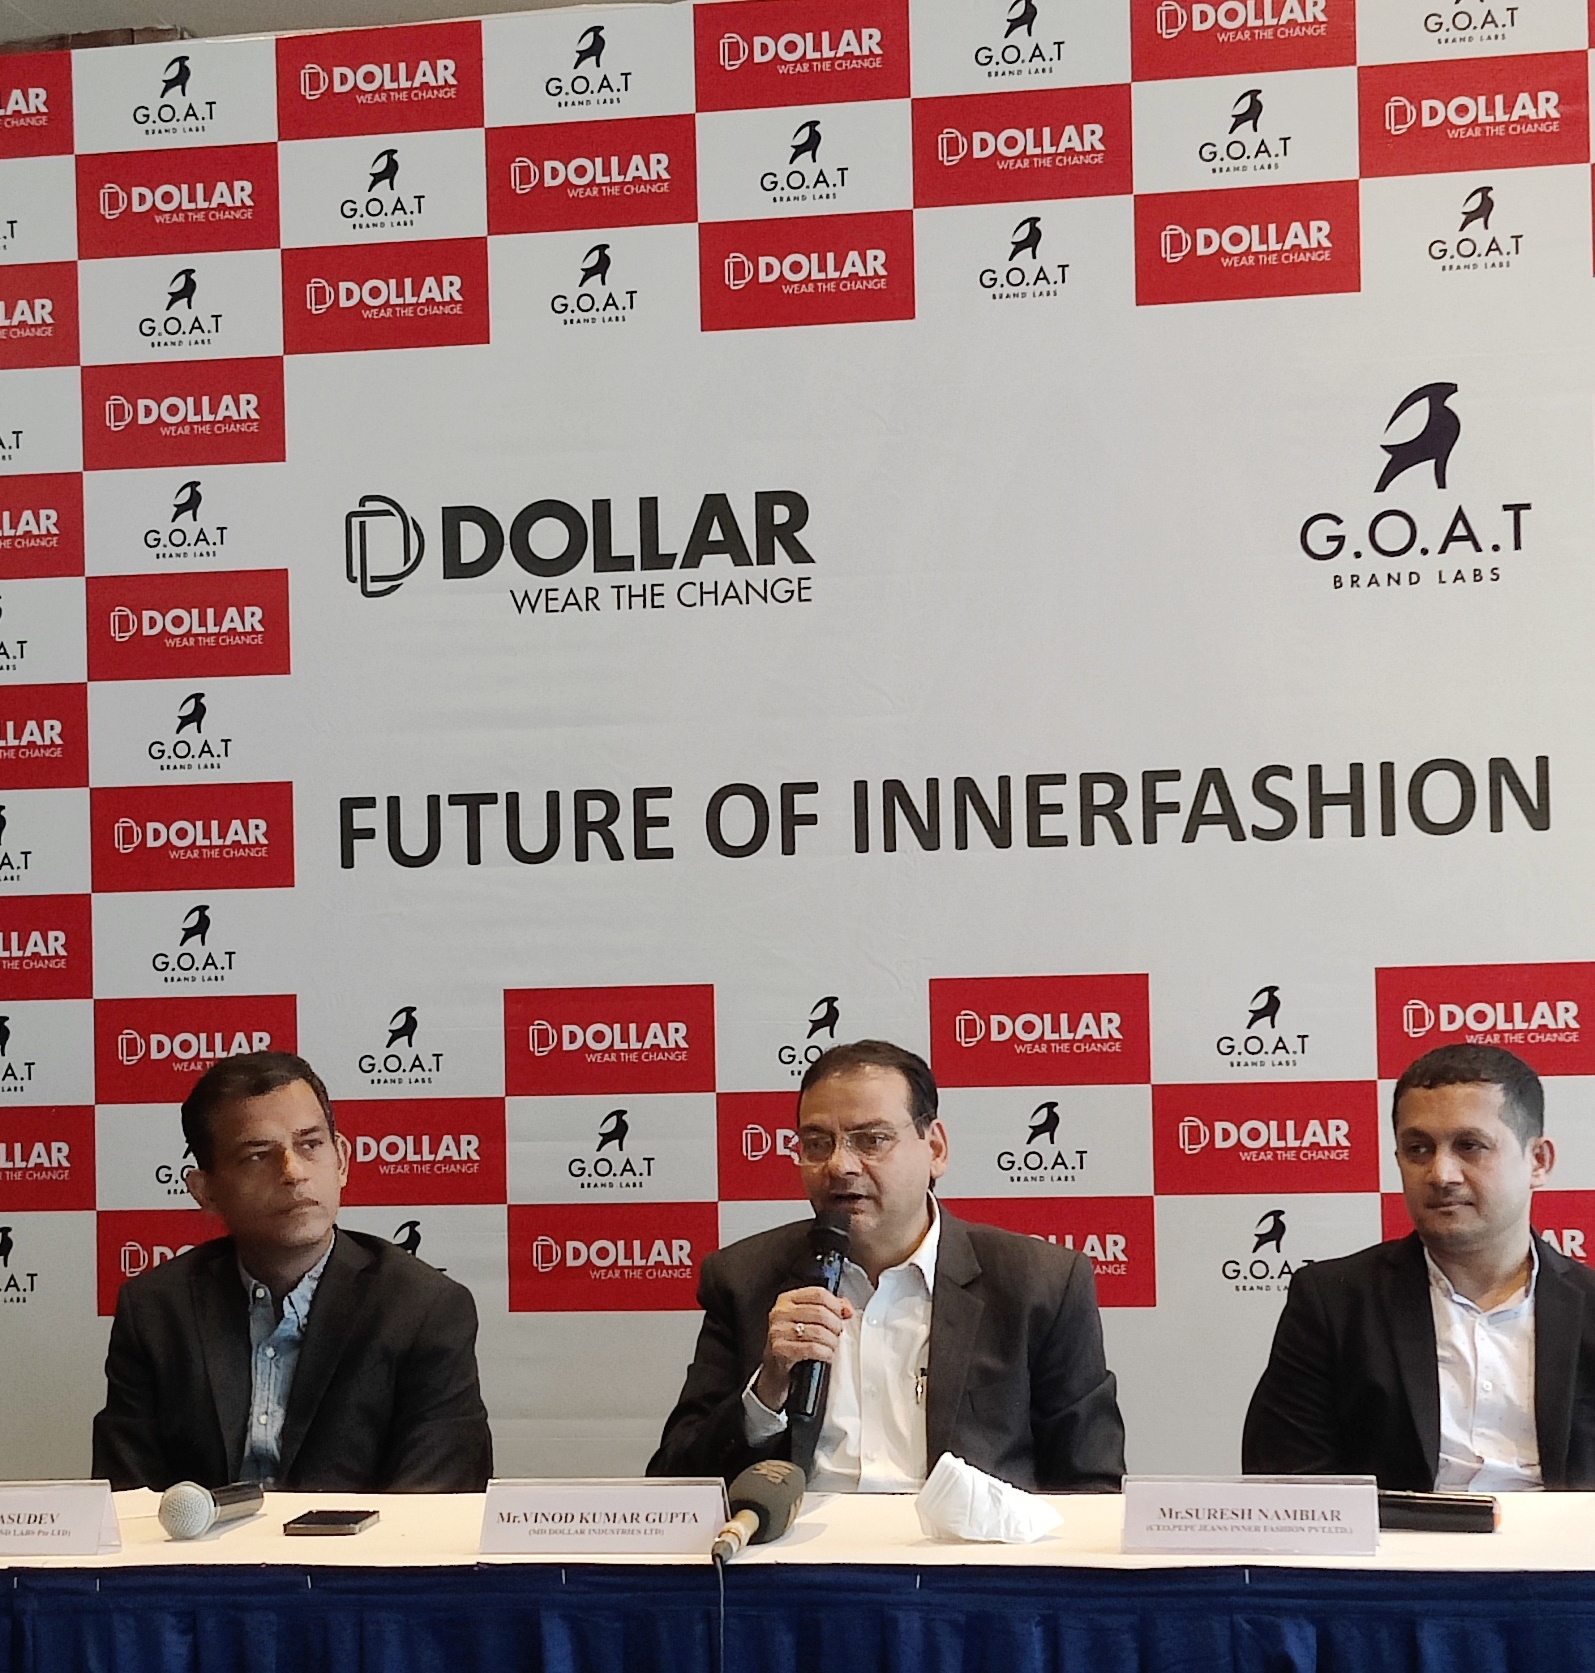 Dollar Industries, G.O.A.T Brand Labs ink JV pact